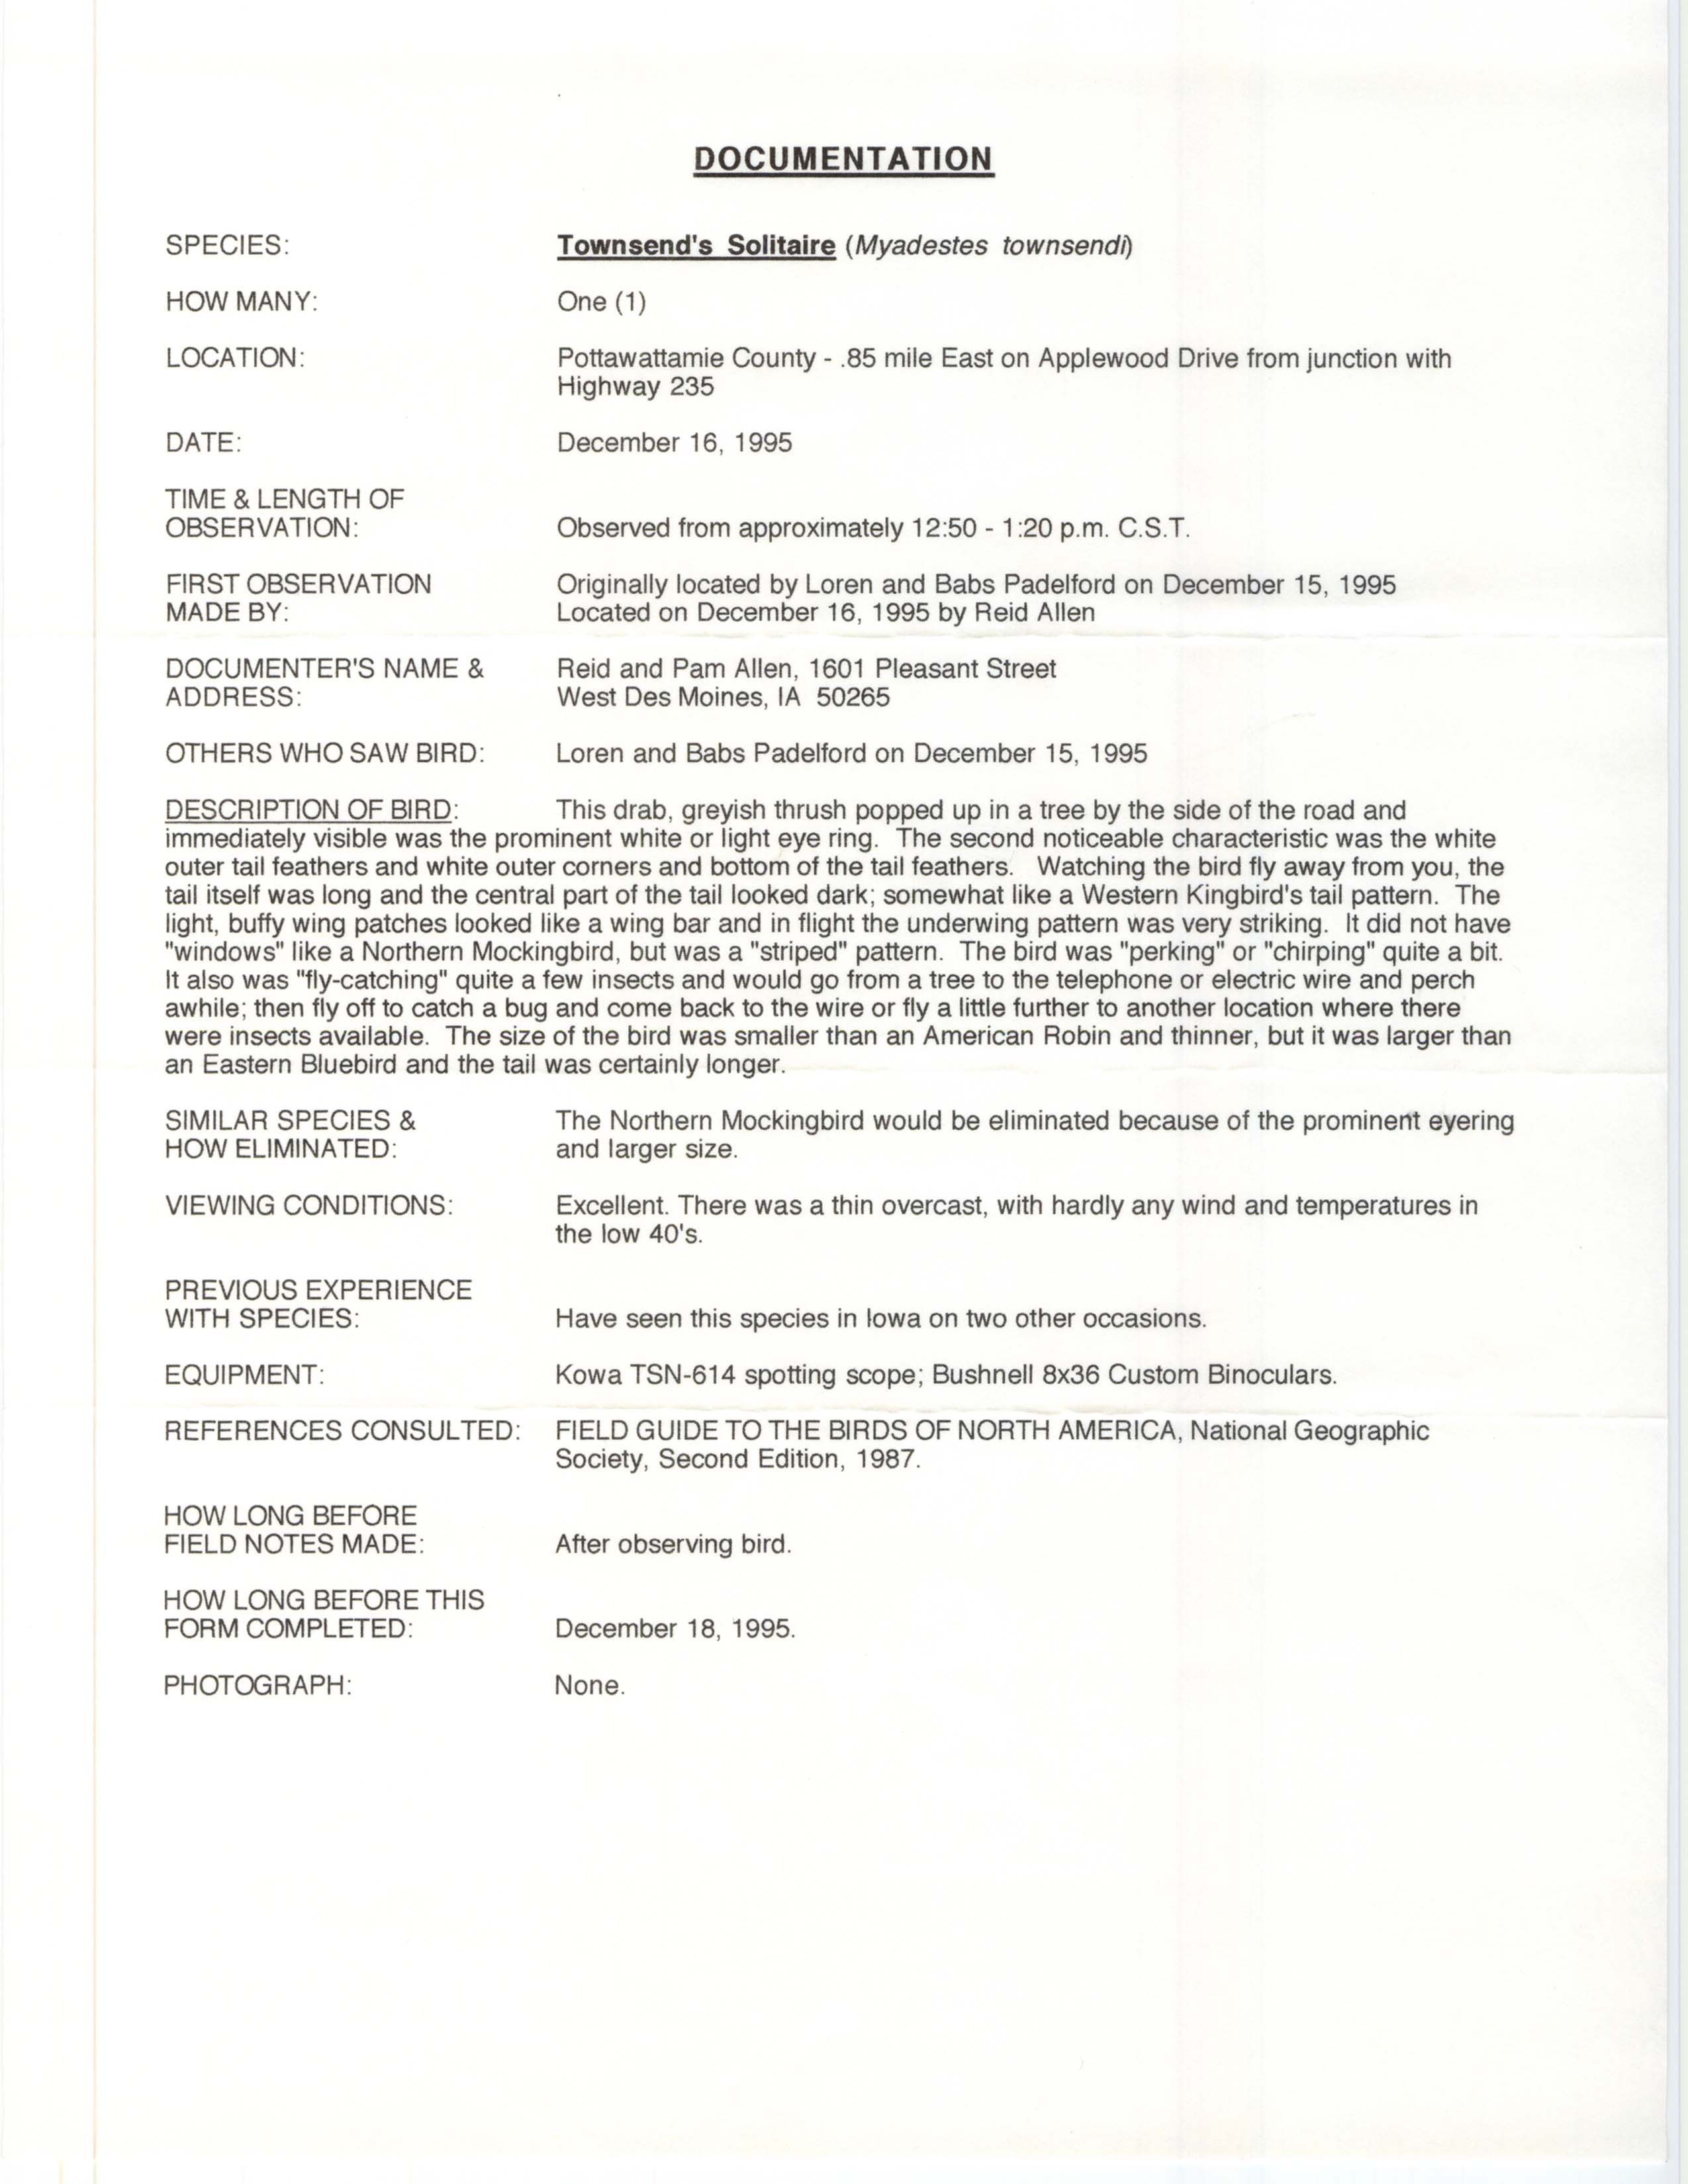 Rare bird documentation form for Townsend's Solitaire in Pottawattamie County, 1995